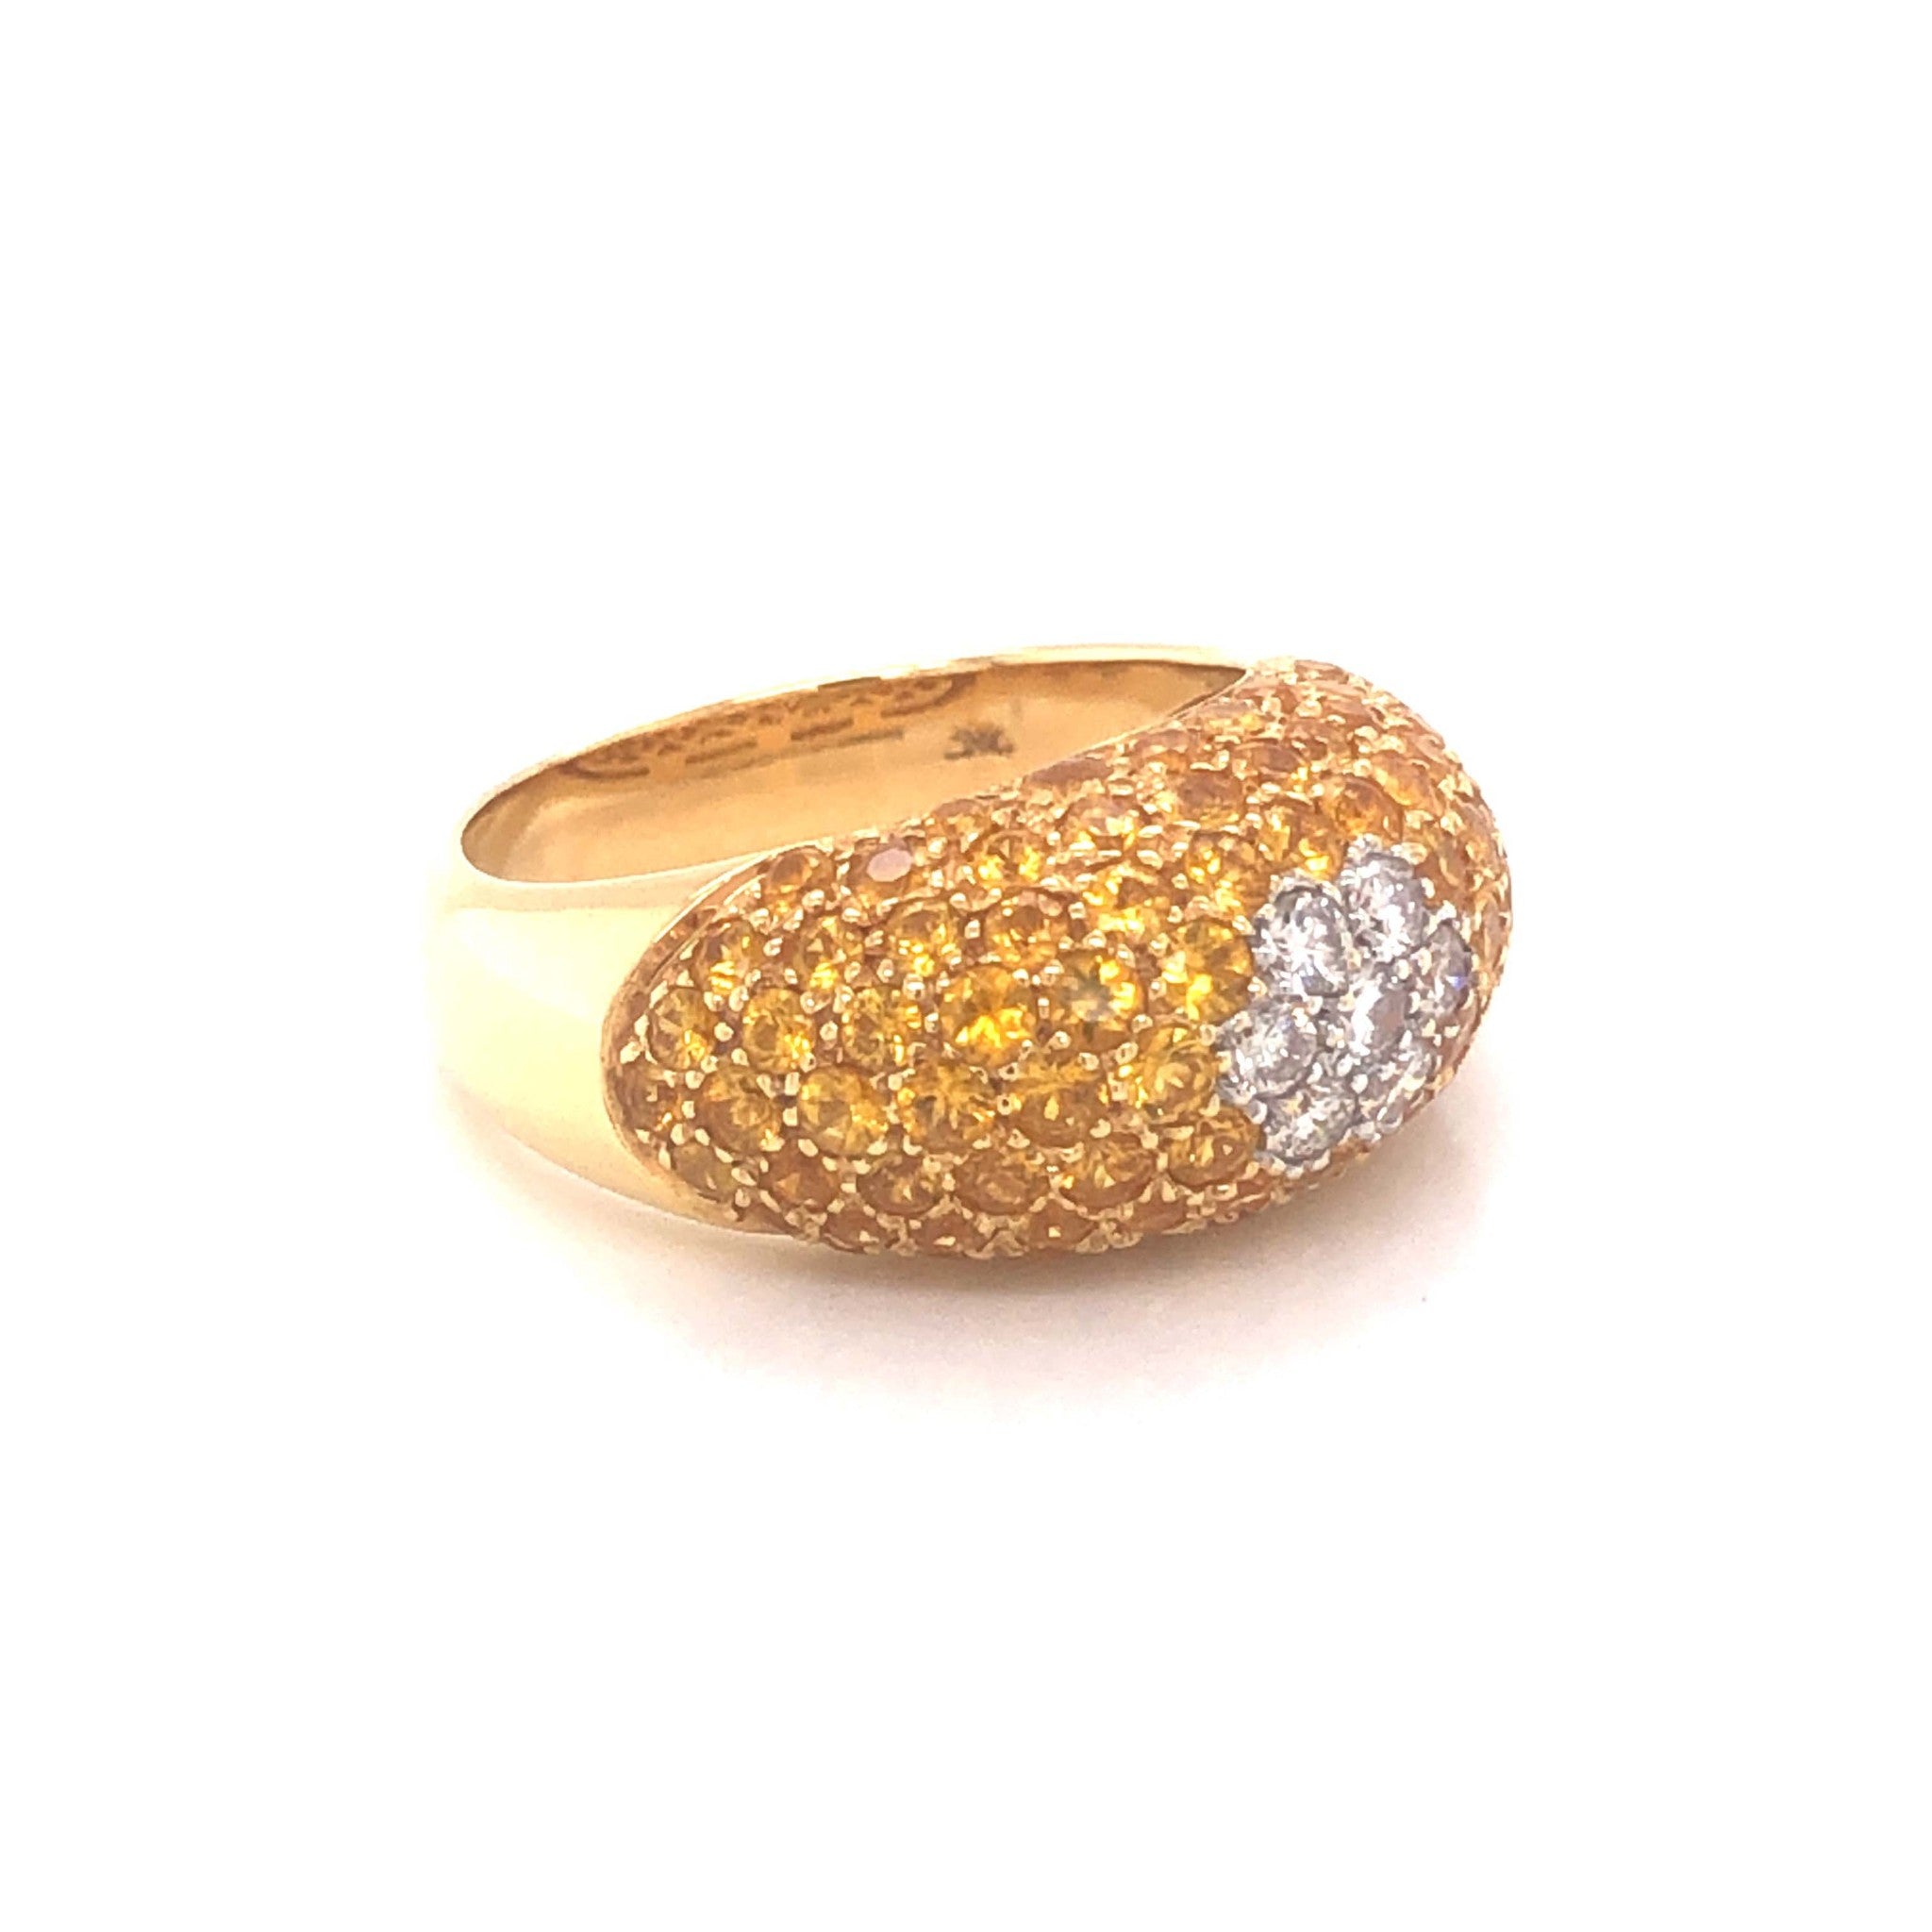 LeVians Yellow Sapphire and Diamond Dome Ring -18k Yellow Gold